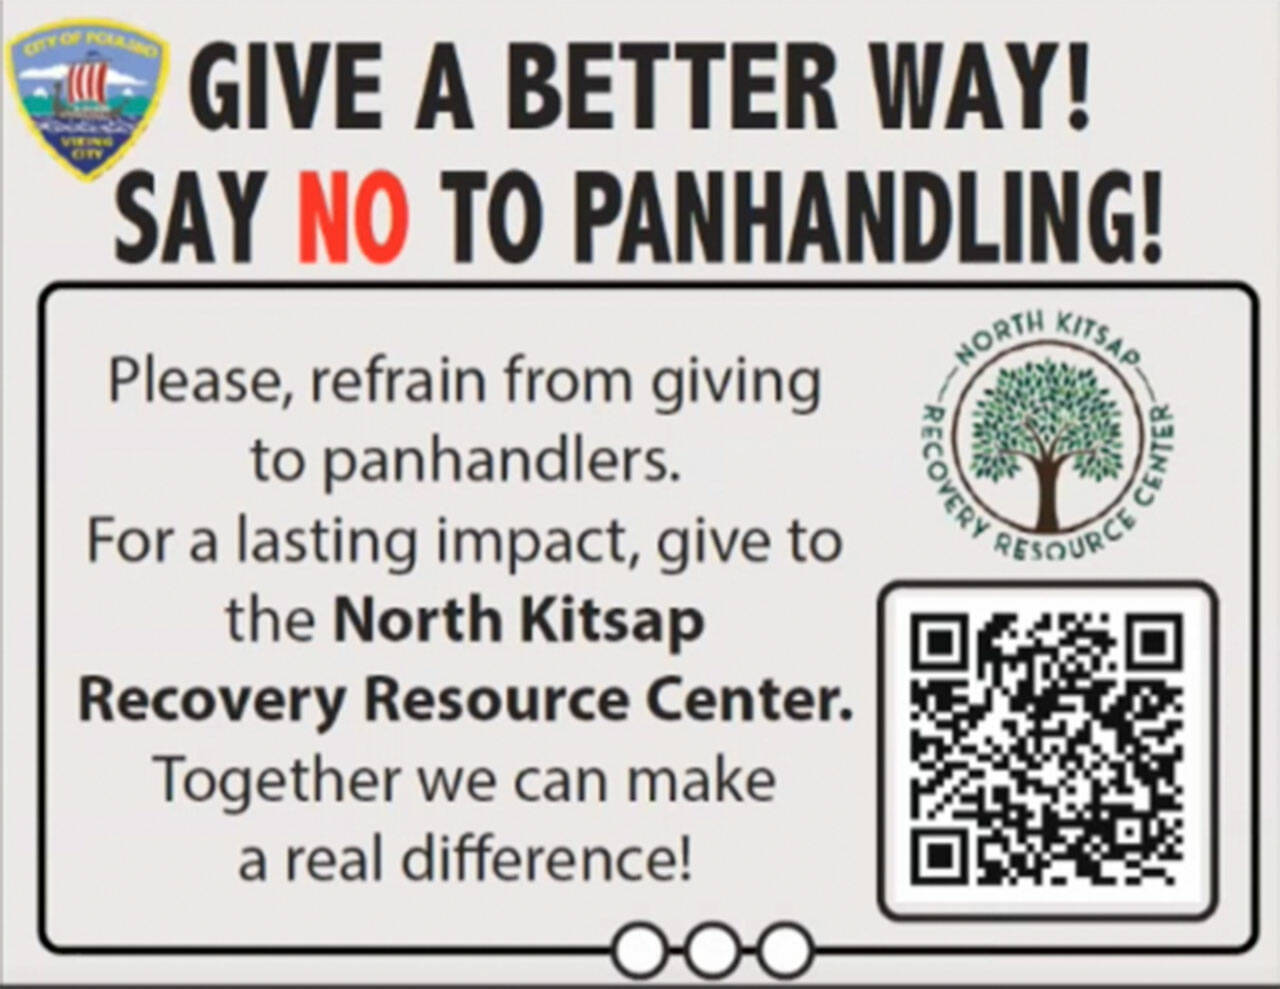 City of Poulsbo courtesy photo
This message advising community members to not give cash to panhandlers will be put on signs around Poulsbo.